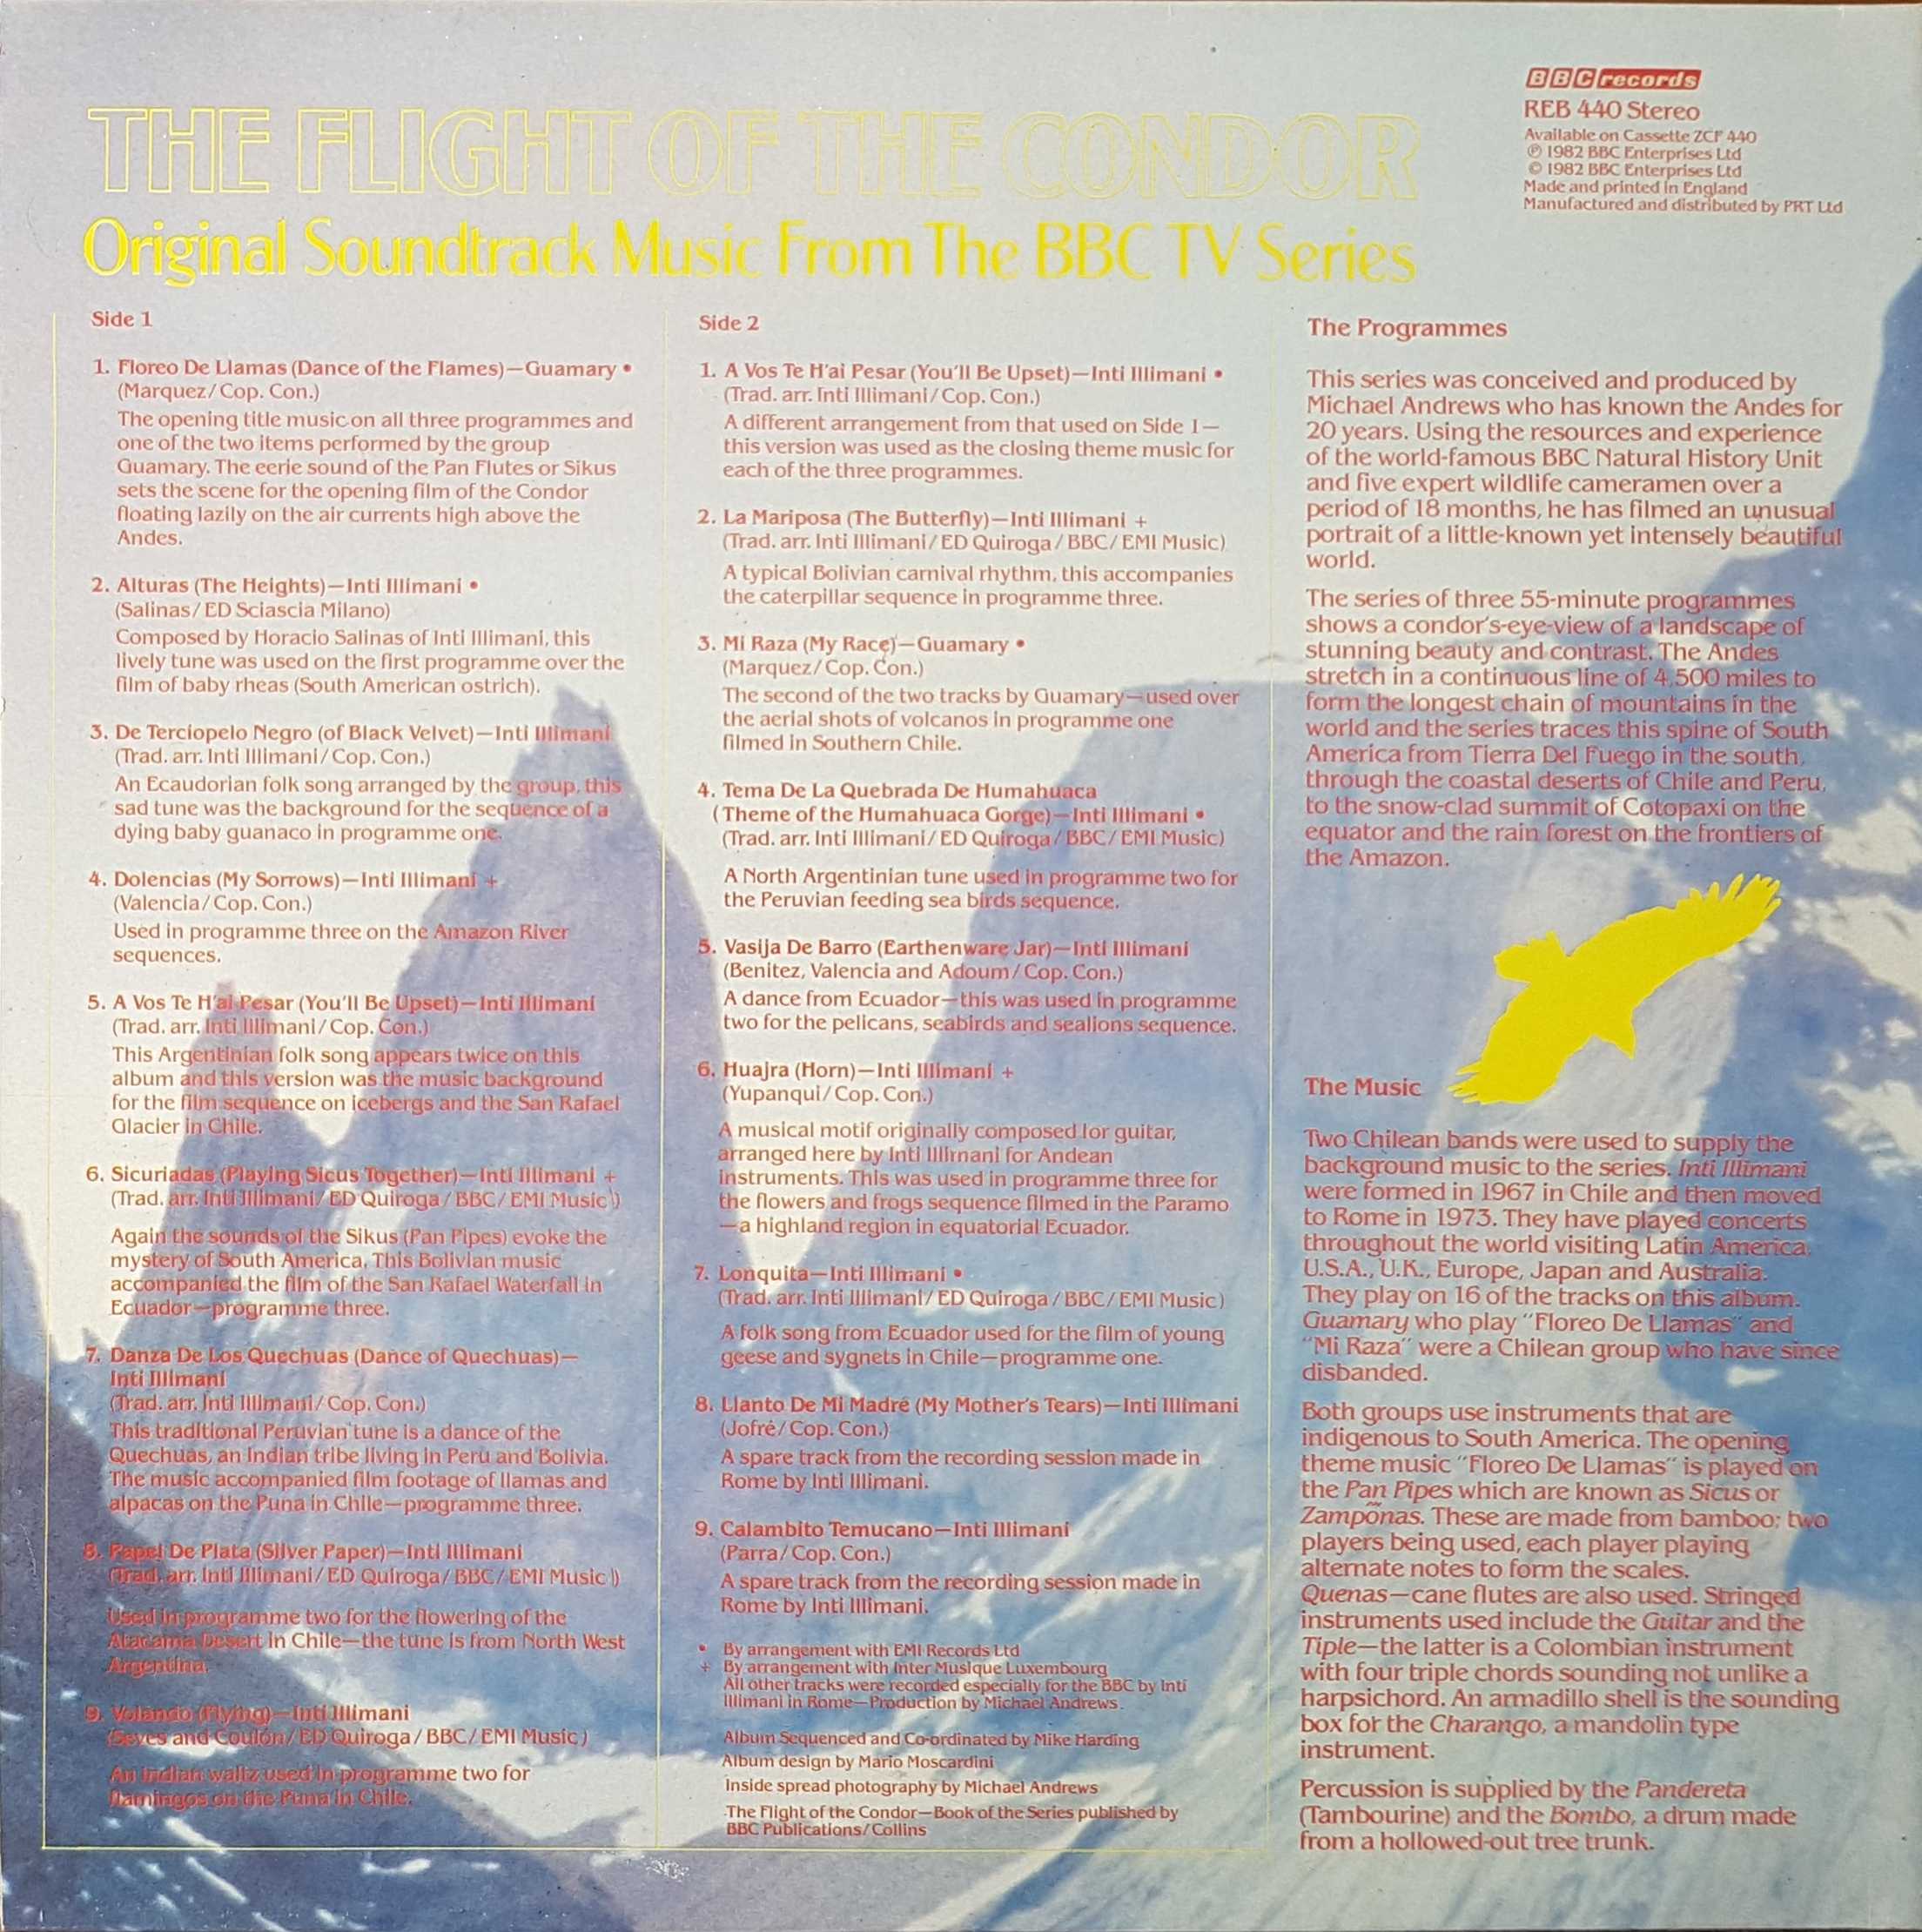 Back cover of REB 440